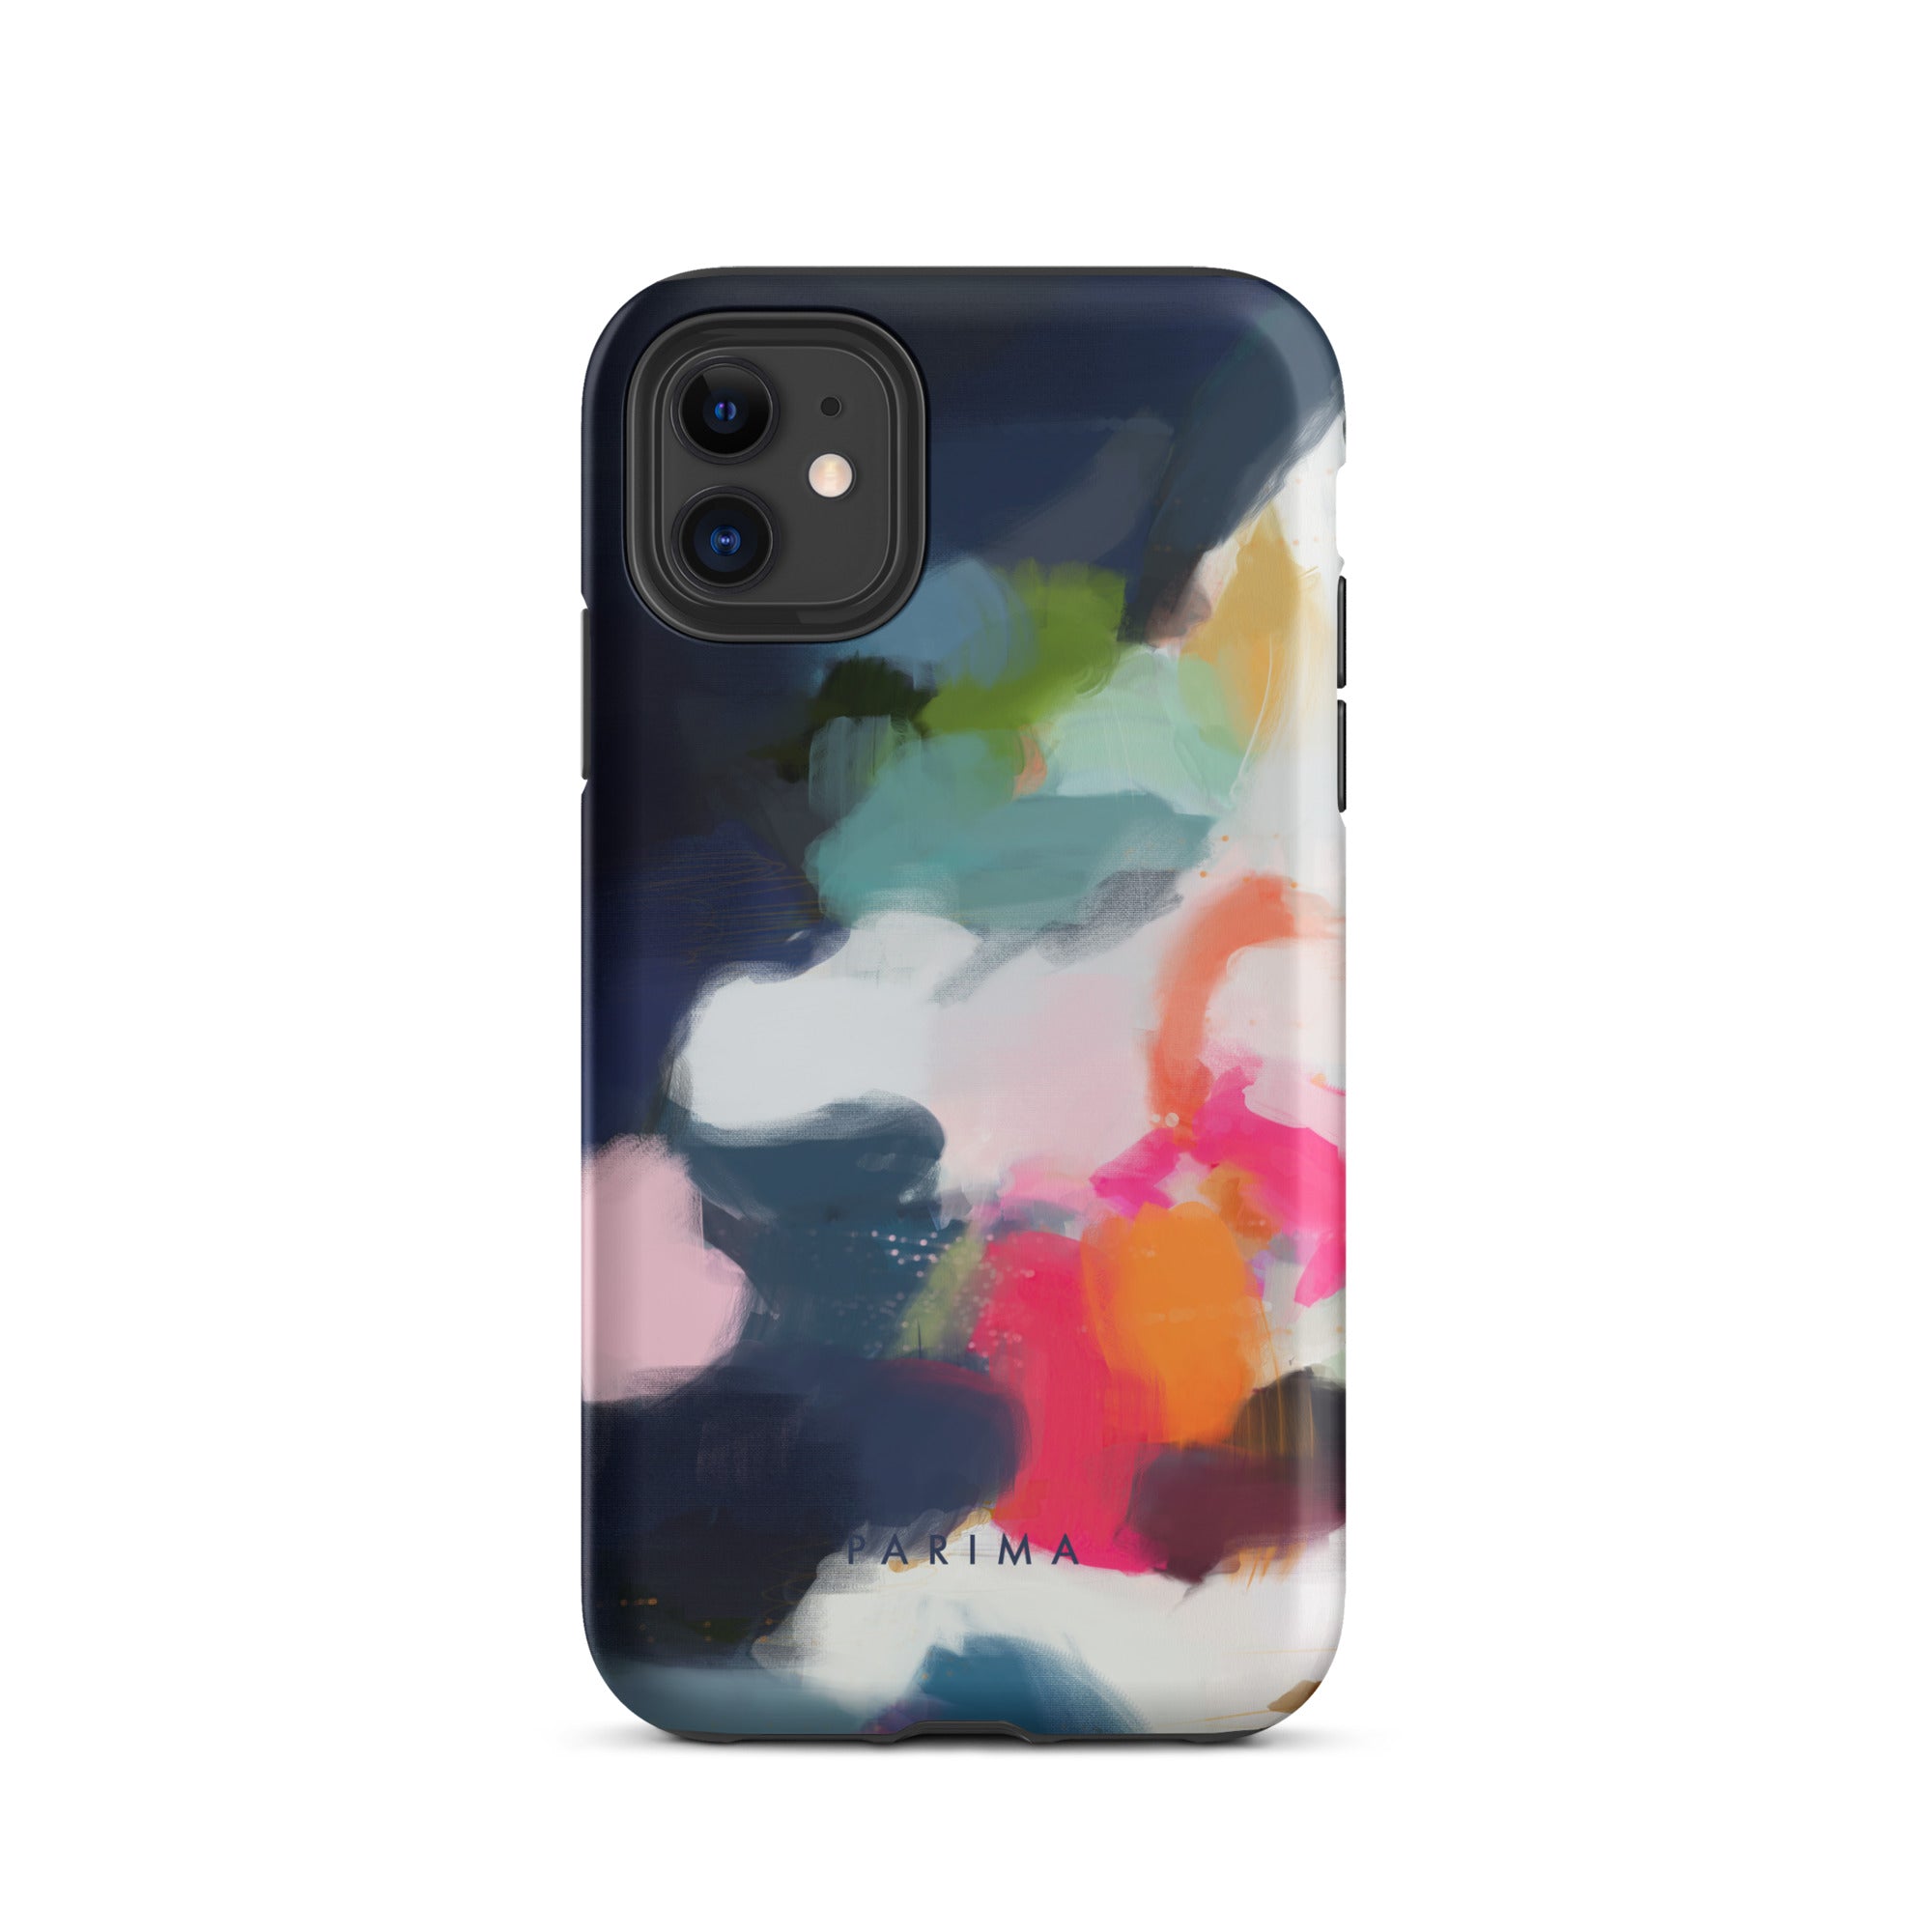 Eliza, pink and blue abstract art - iPhone 11 tough case by Parima Studio